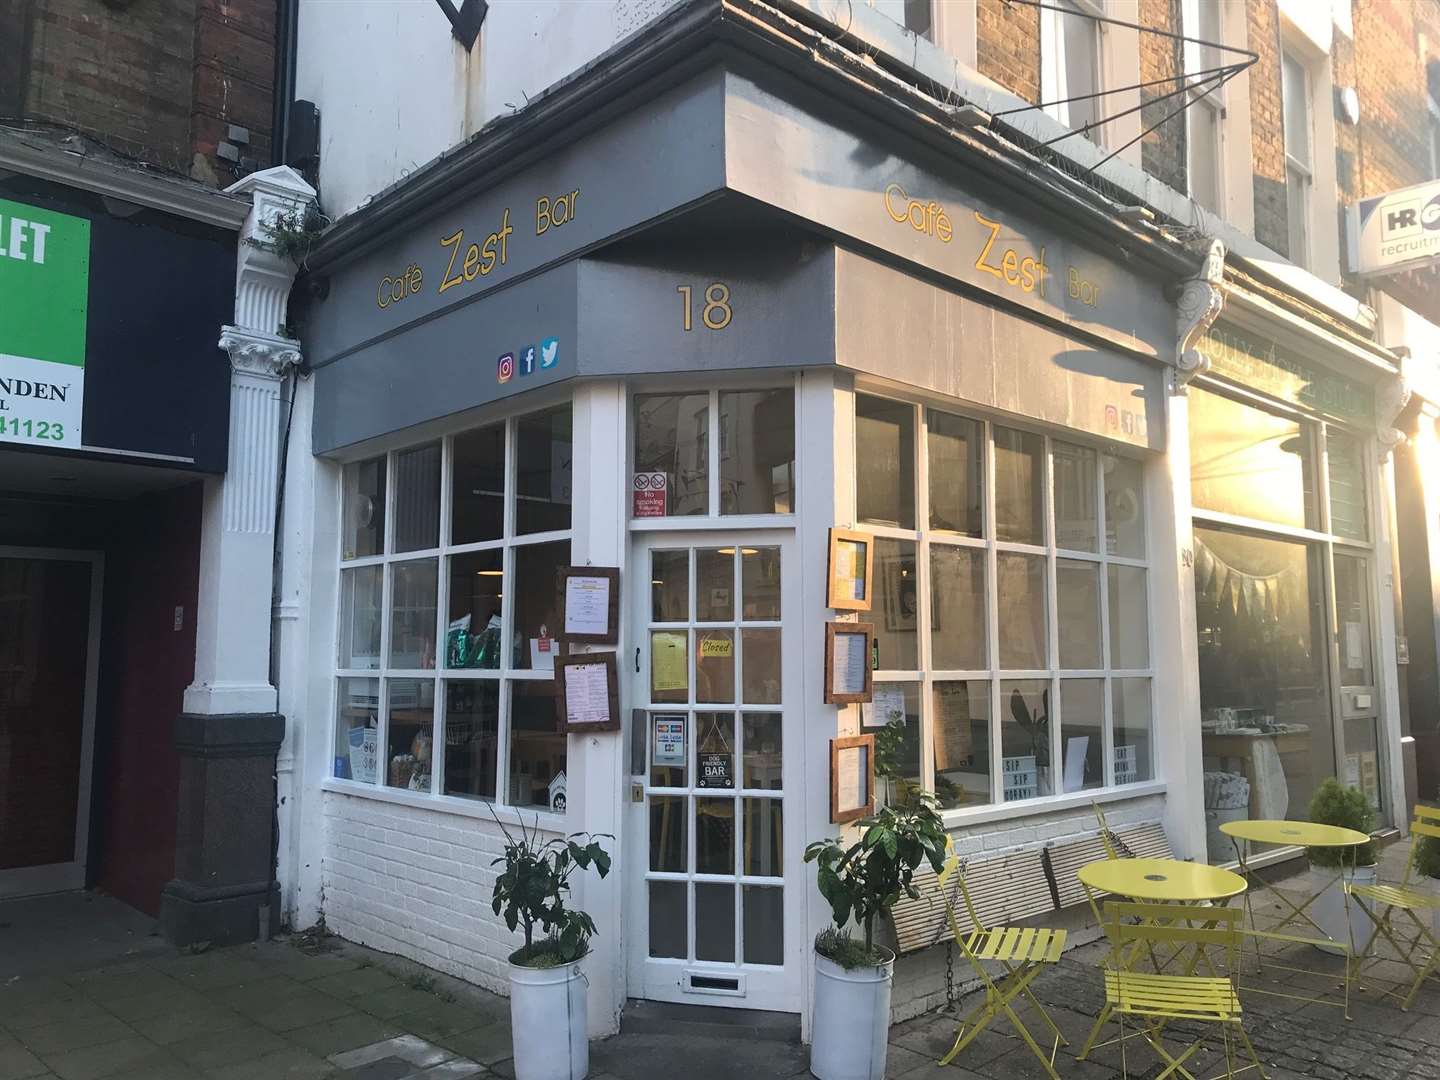 The Zest Cafe & Cocktail Bar in Queen Street, Ramsgate